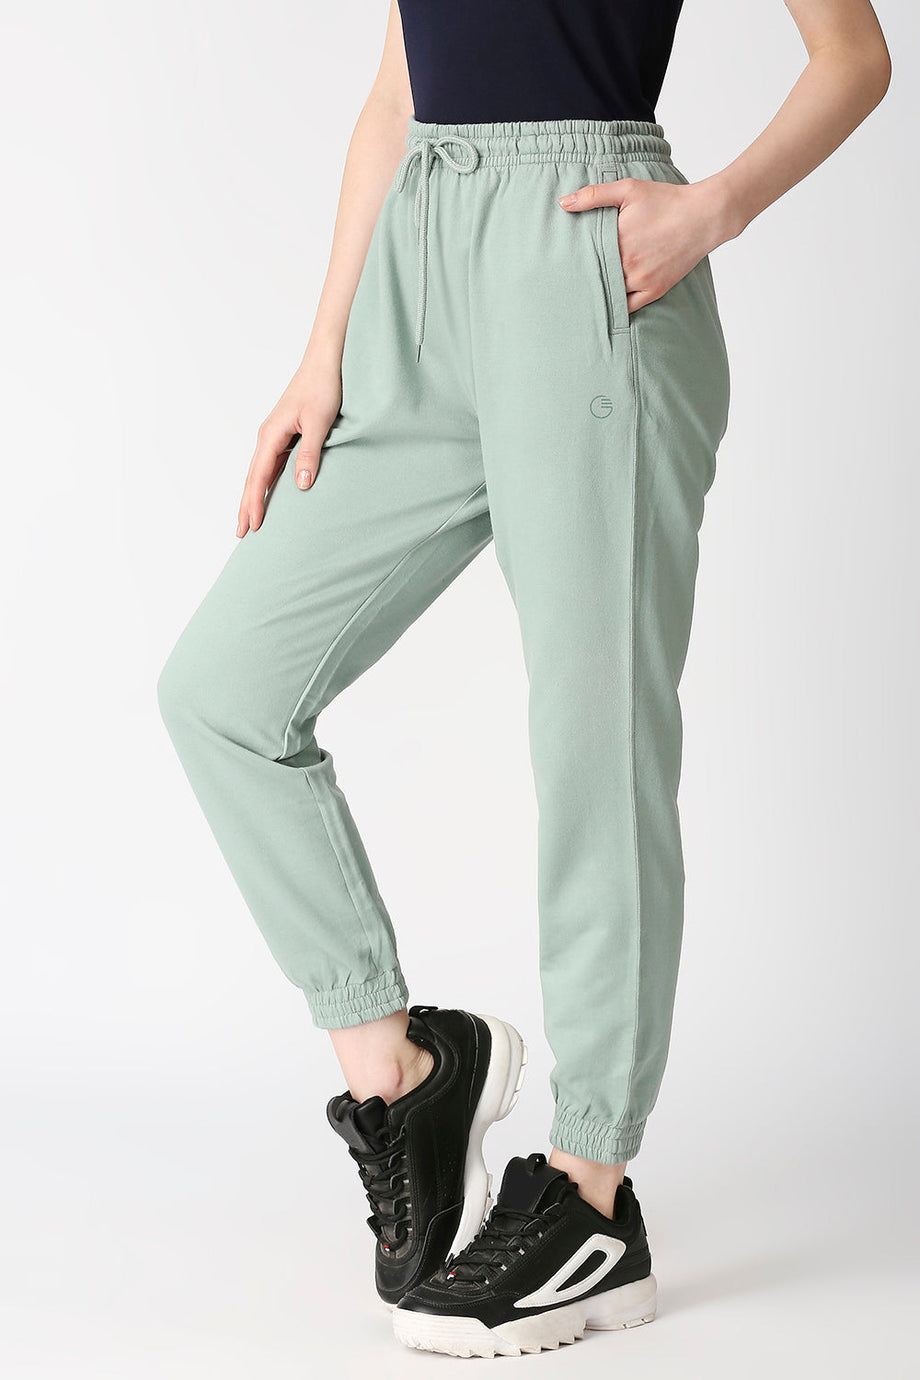 Gray Eagle Women's High Waisted Lounge Joggers Style# GWJR21